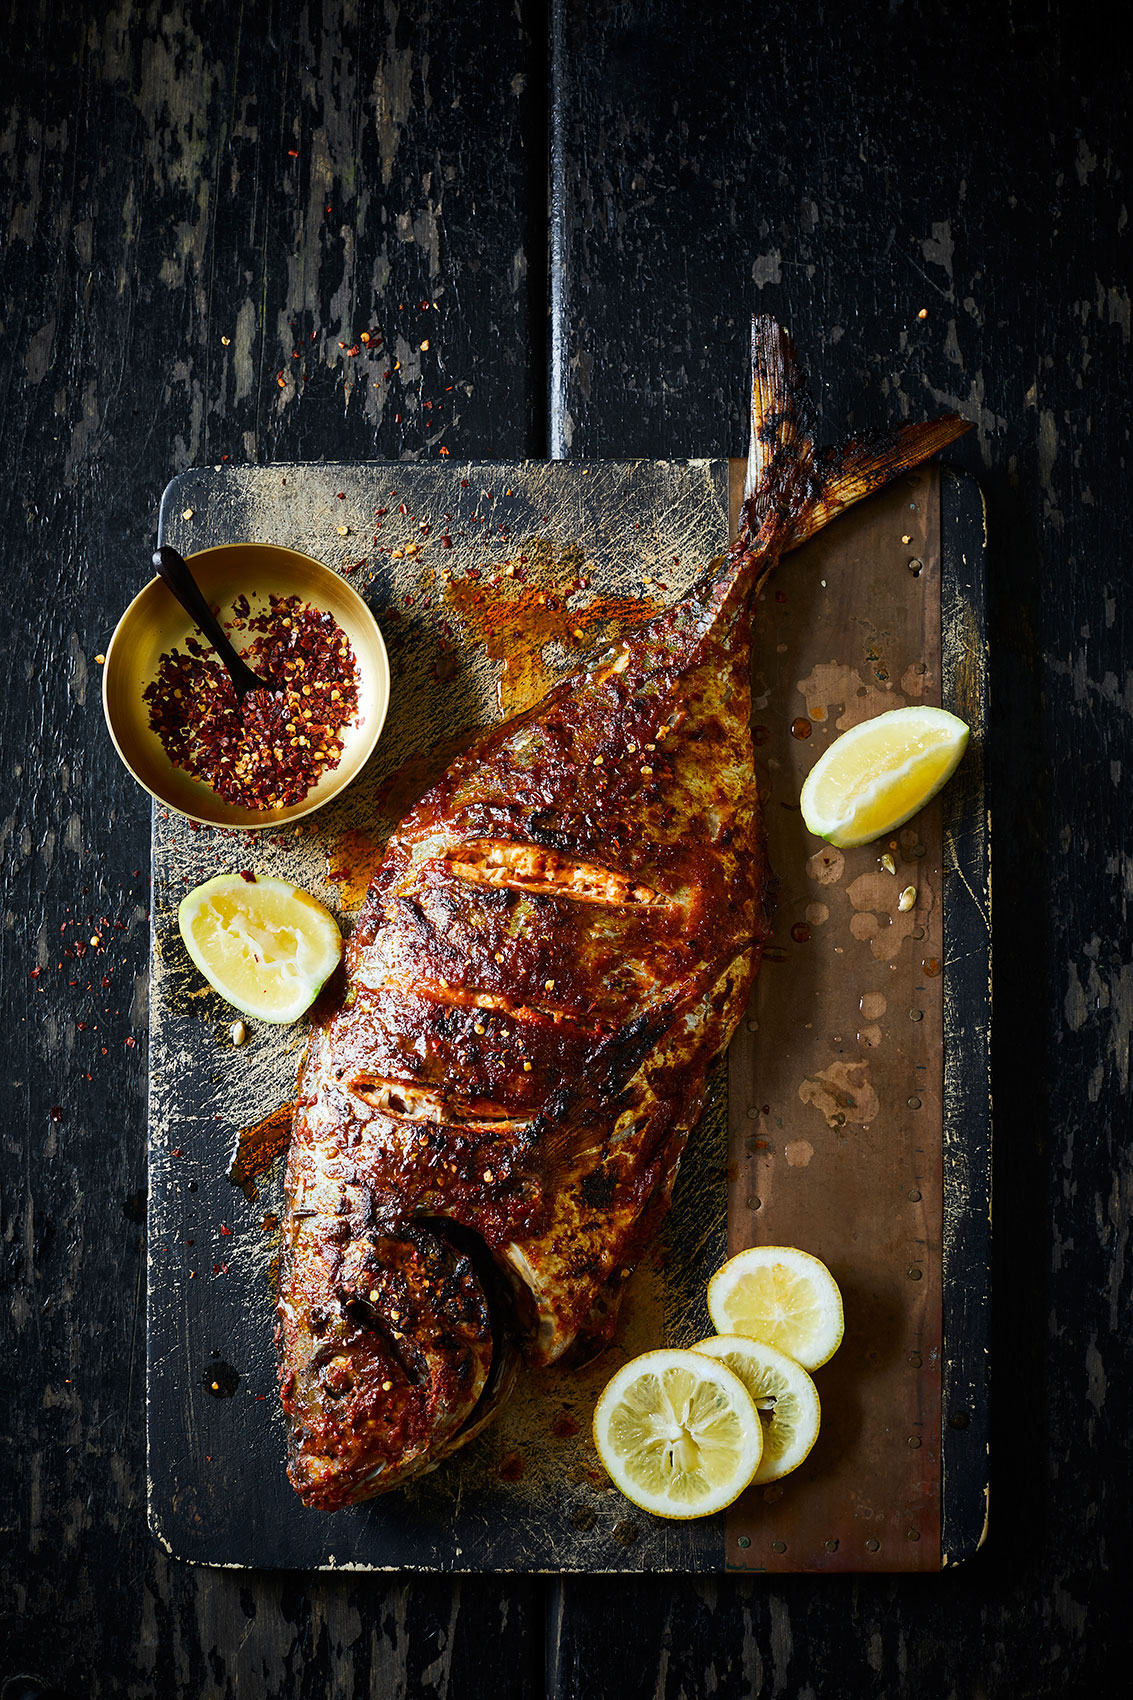 Masala Fish with Chilli & Lemon on Wooden Board • Advertising & Editorial Food Photography